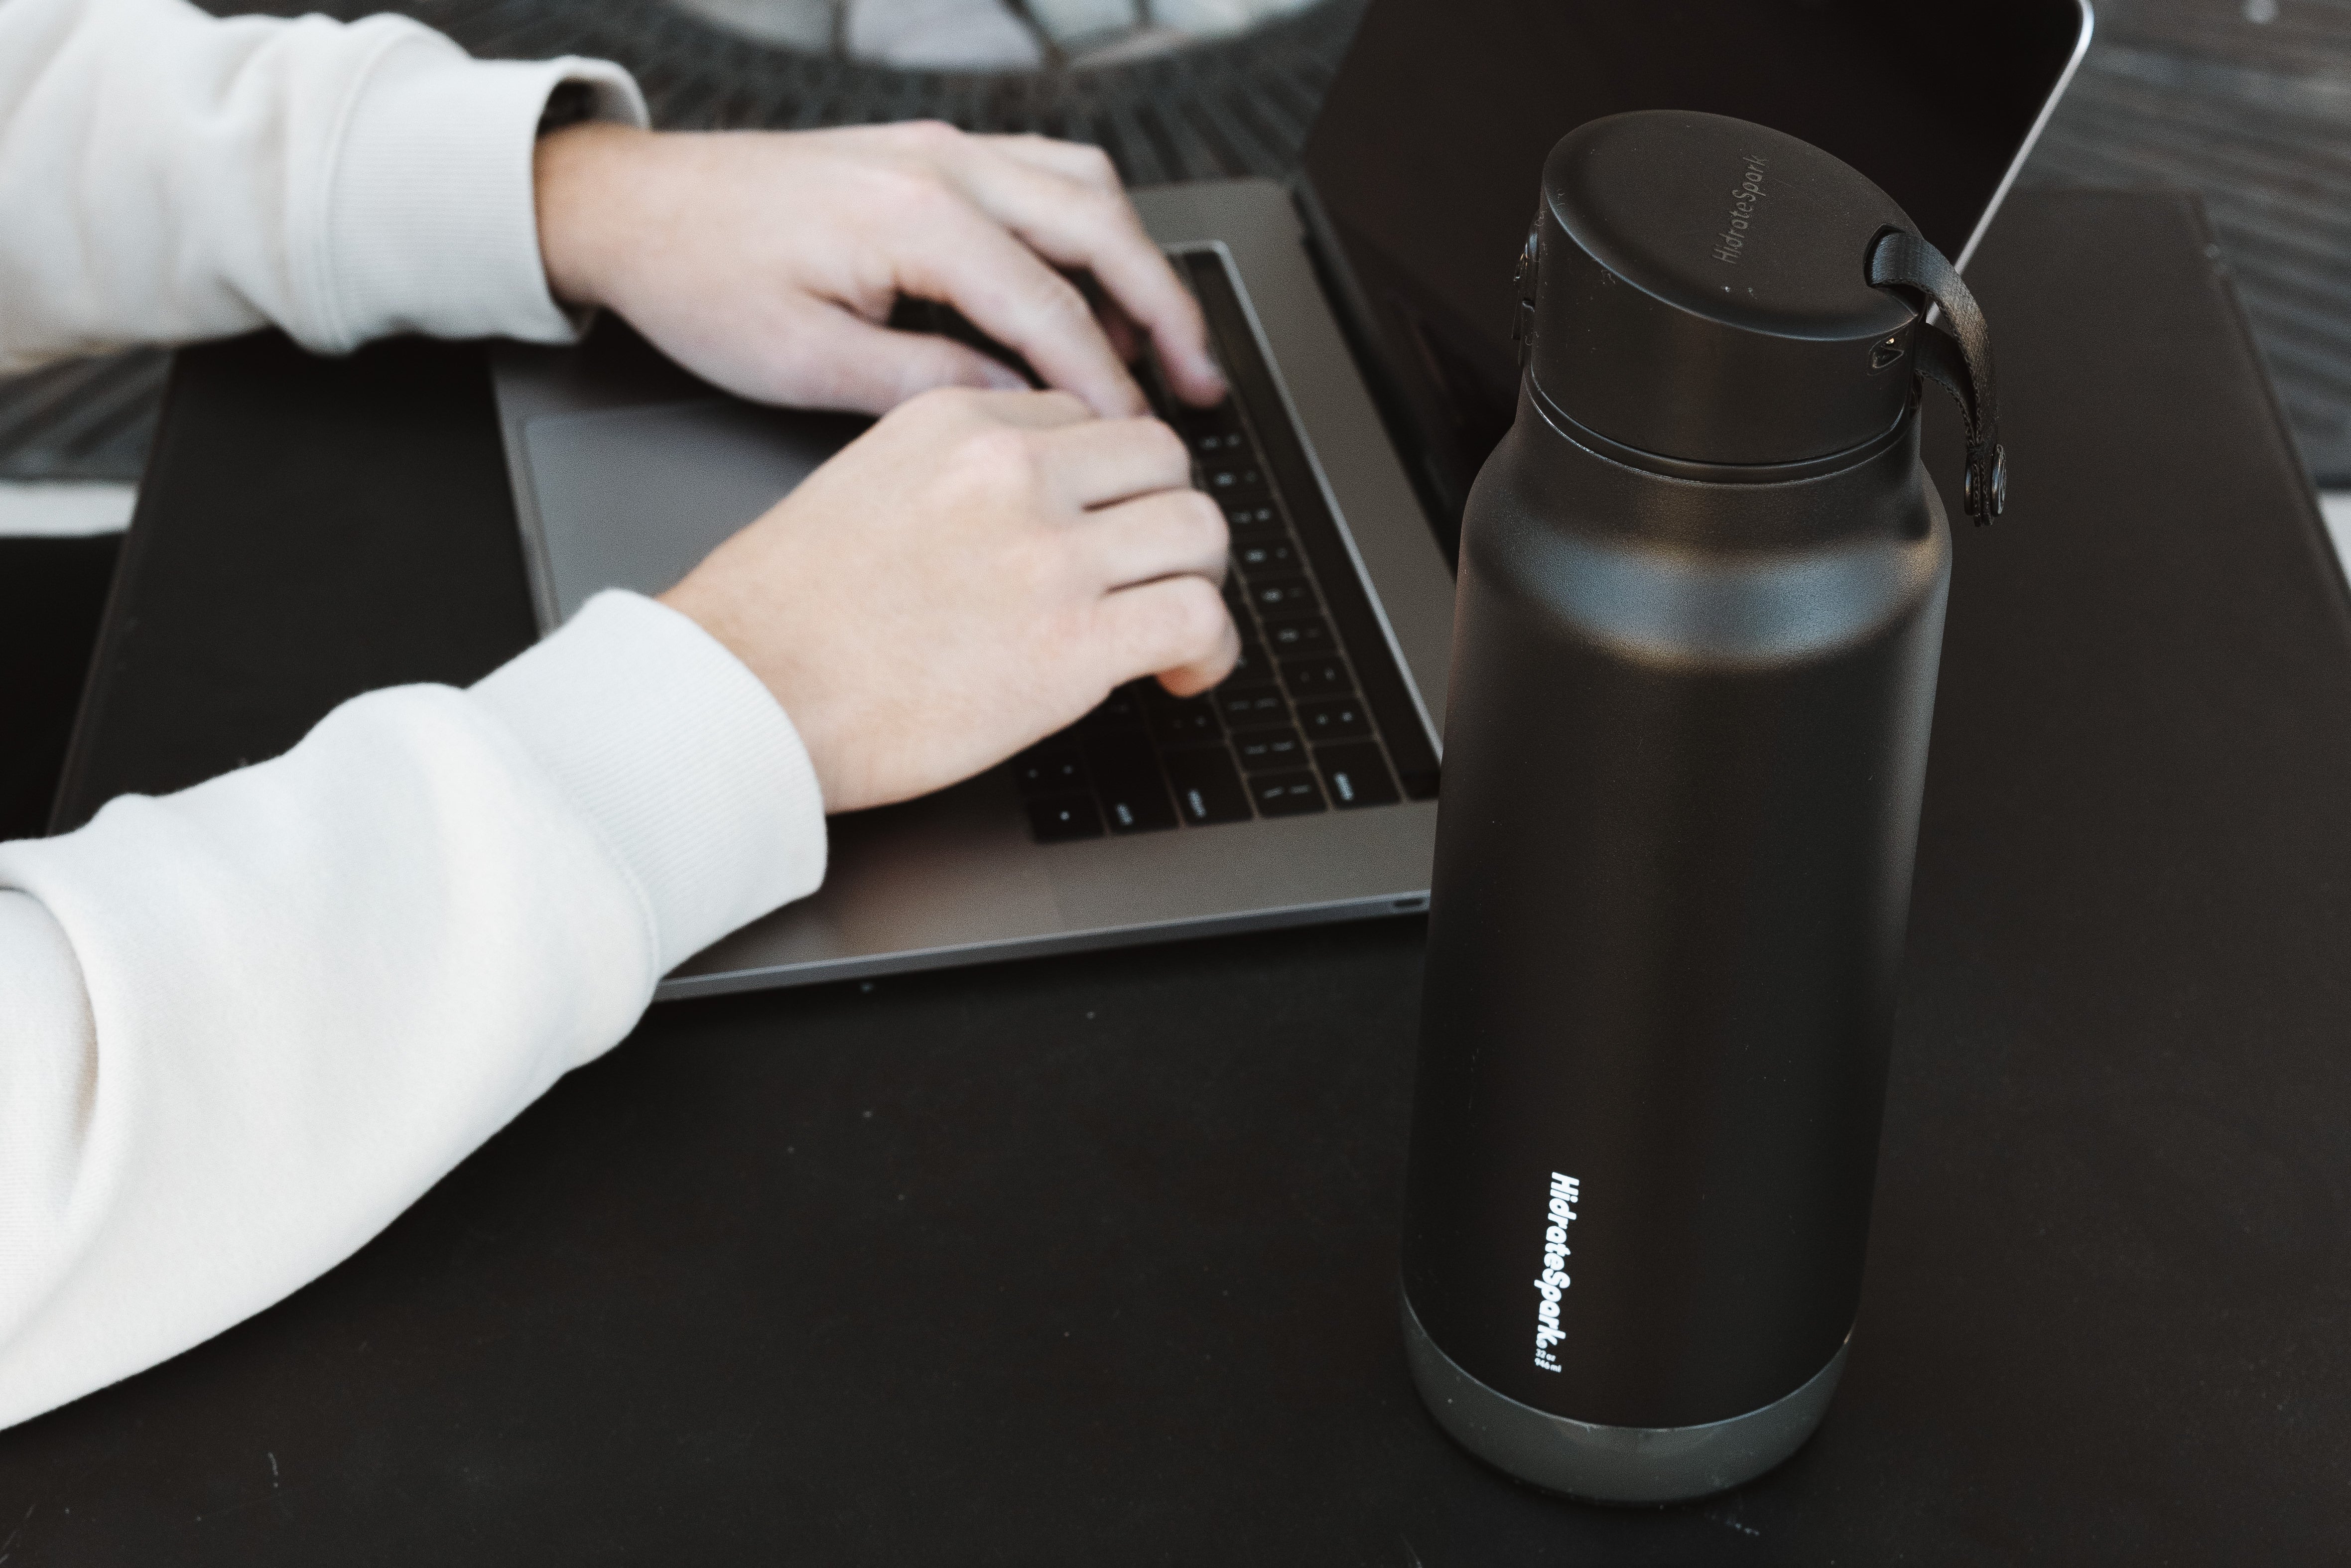 4 Clinically Proven Benefits of Insulated Water Bottle and Tumbler